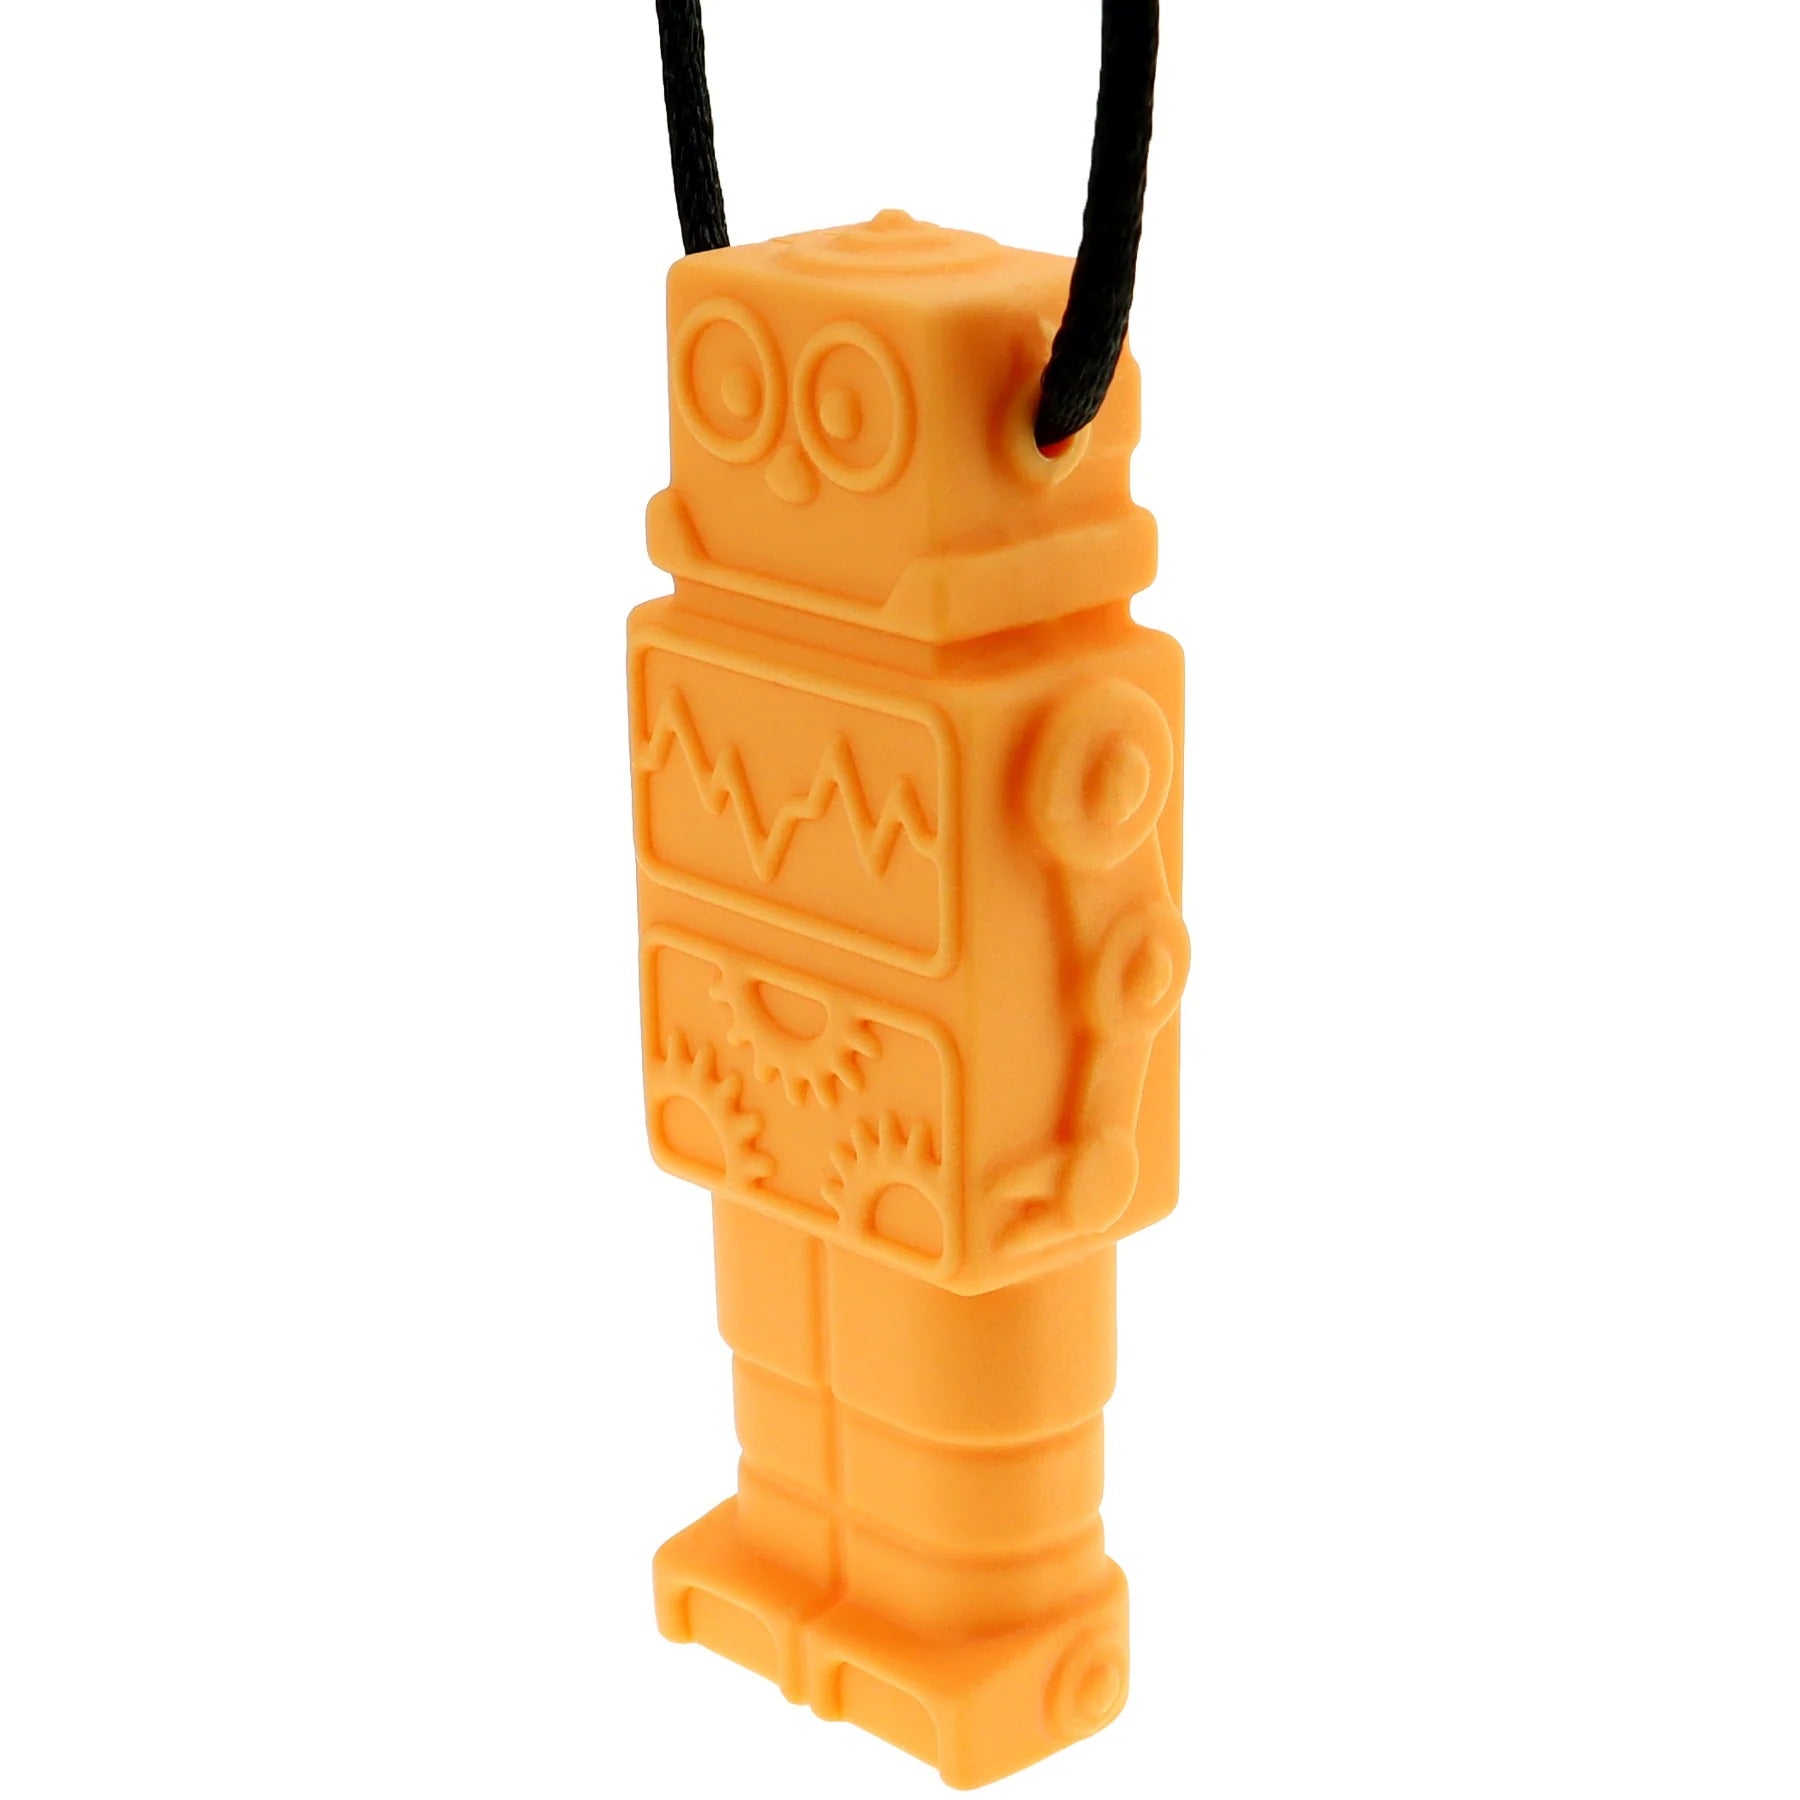 CHUIT Chew Toy Robotz, Chew Robotz have landed! The CHUIT Chew Toy Robotz Shape Sensory Chew Necklaces are a fashionable chewie for moderate chewers. Kids will love the smooth breakaway cording. It’s silky soft and feels great against the neck.This pendant is made of non-toxic, food grade silicone and contains no BPAs. Kids will love the smooth breakaway cording. It’s silky soft and feels great against the neck. This pendant is made of non-toxic, food grade silicone and contains no BPAs. This item is design